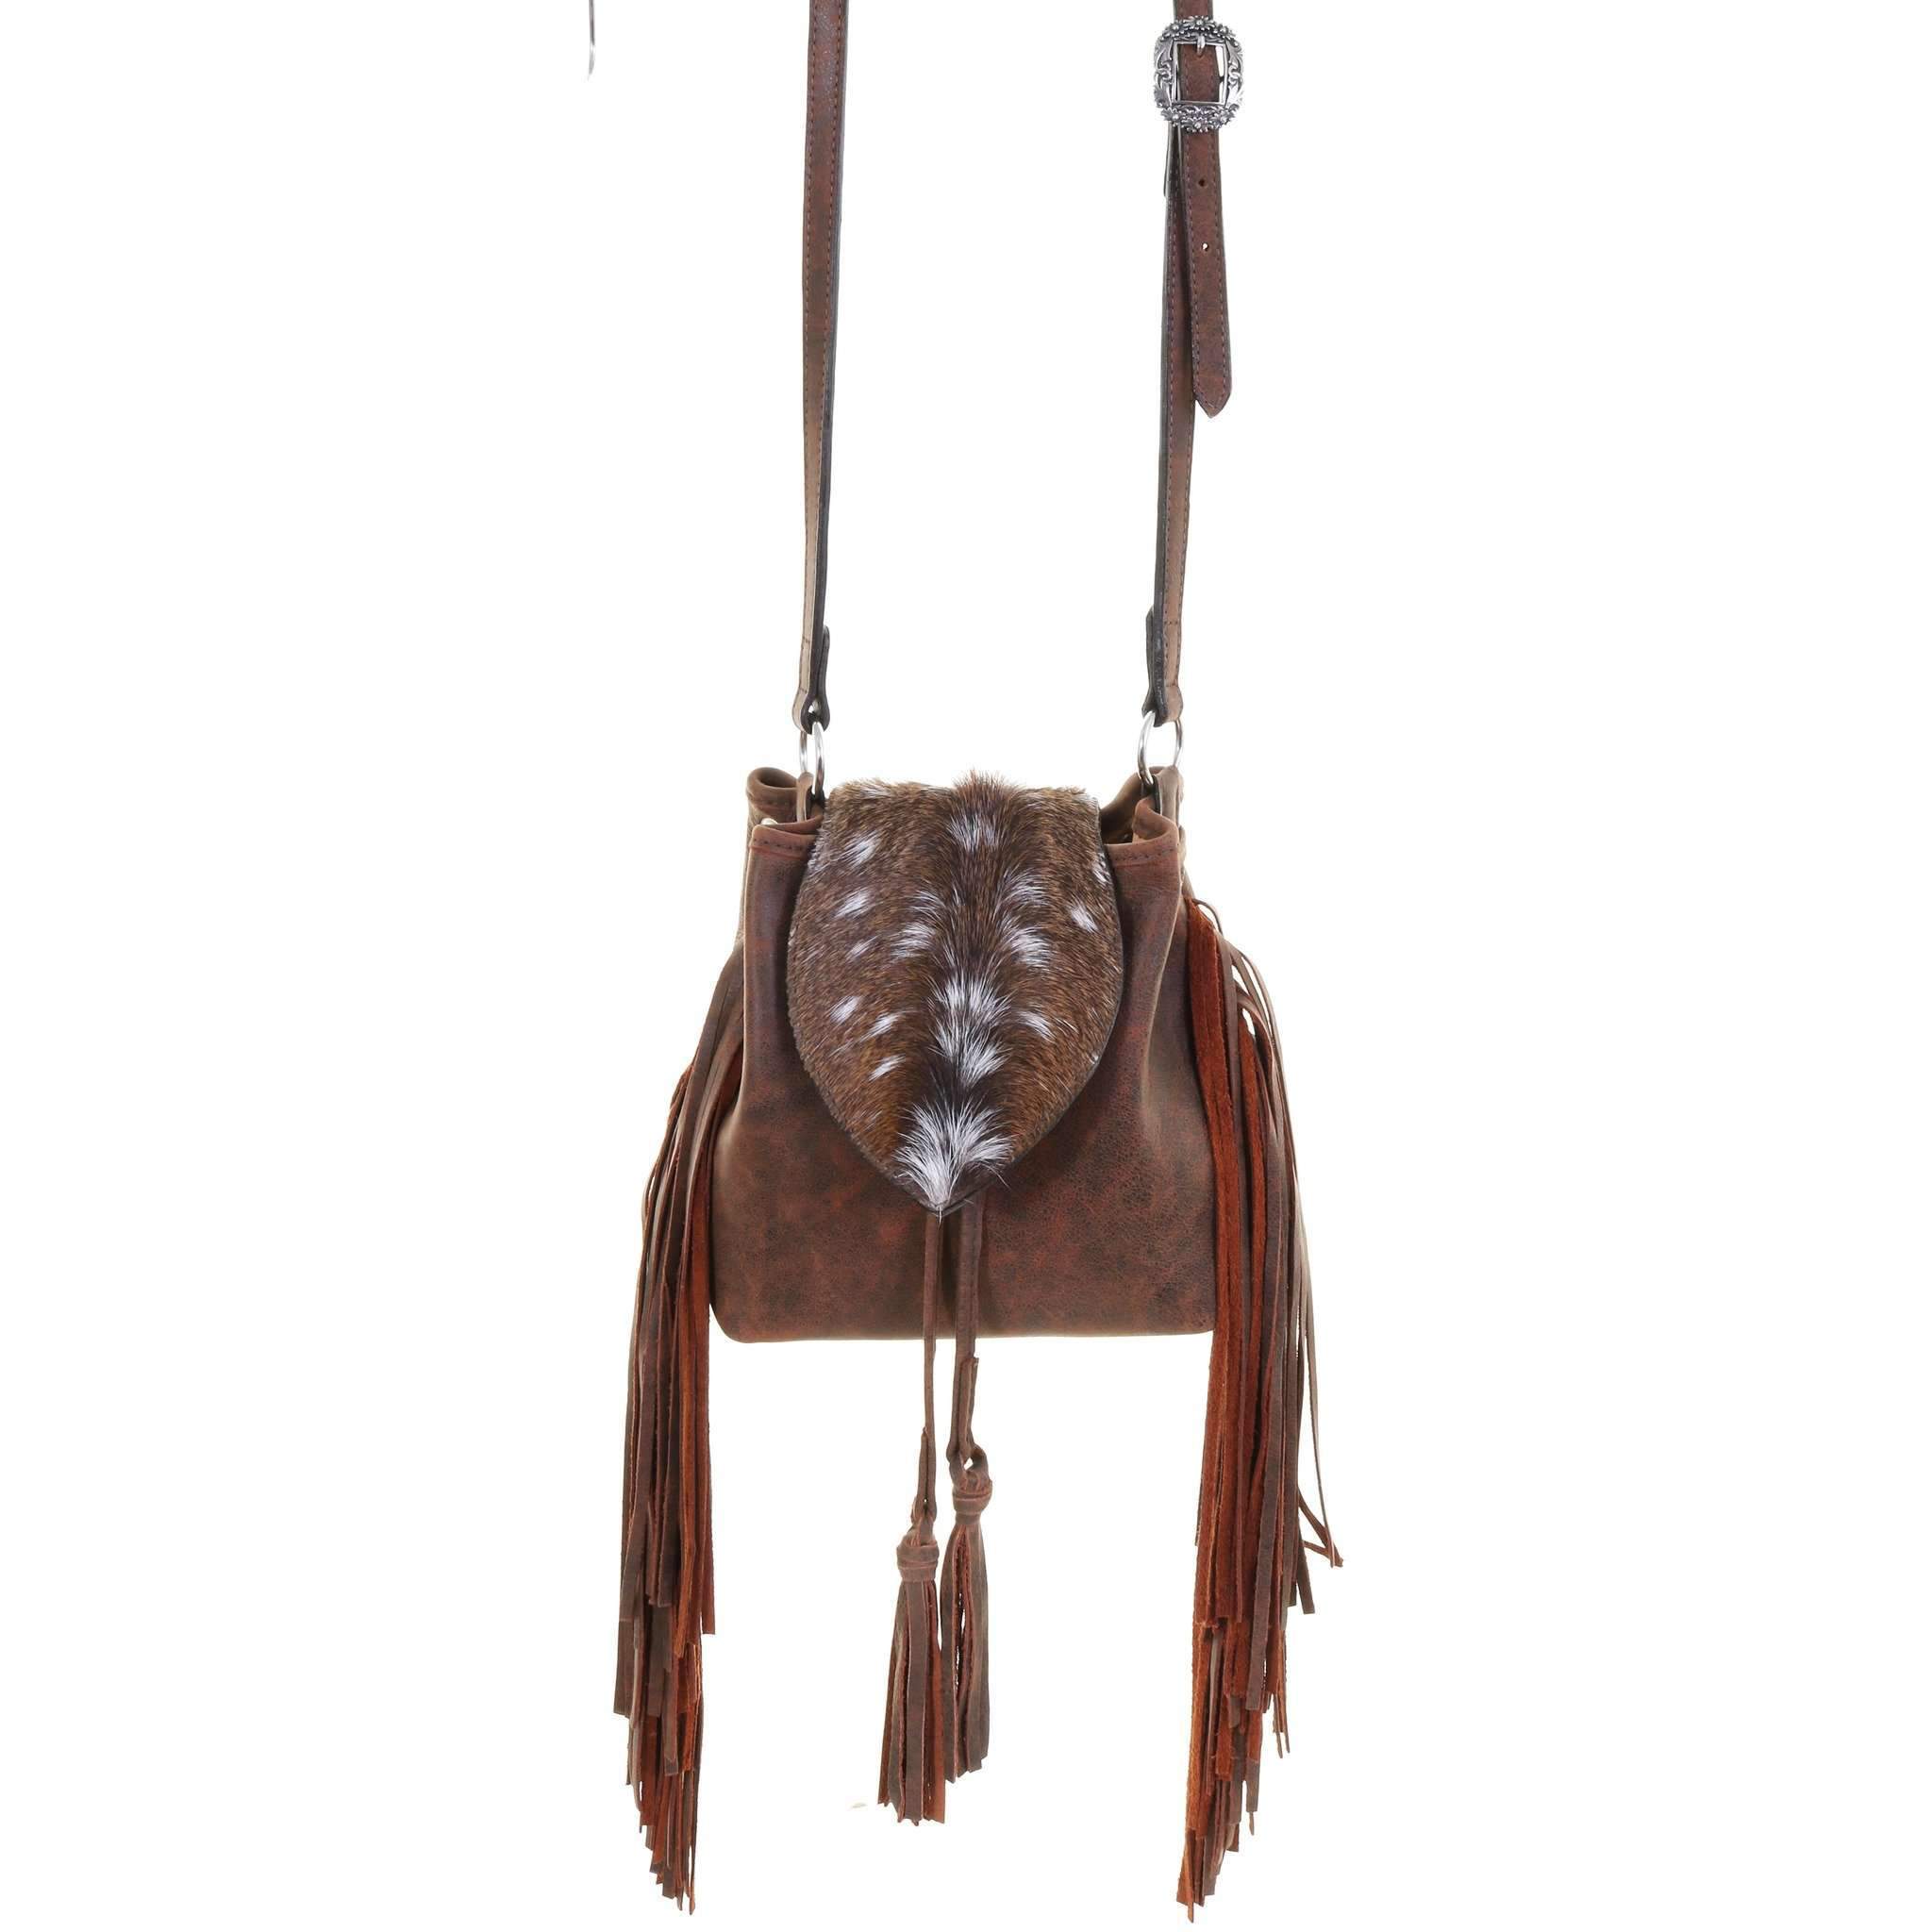 DP01 - Axis Hair Drawstring Pouch Purse - Double J Saddlery